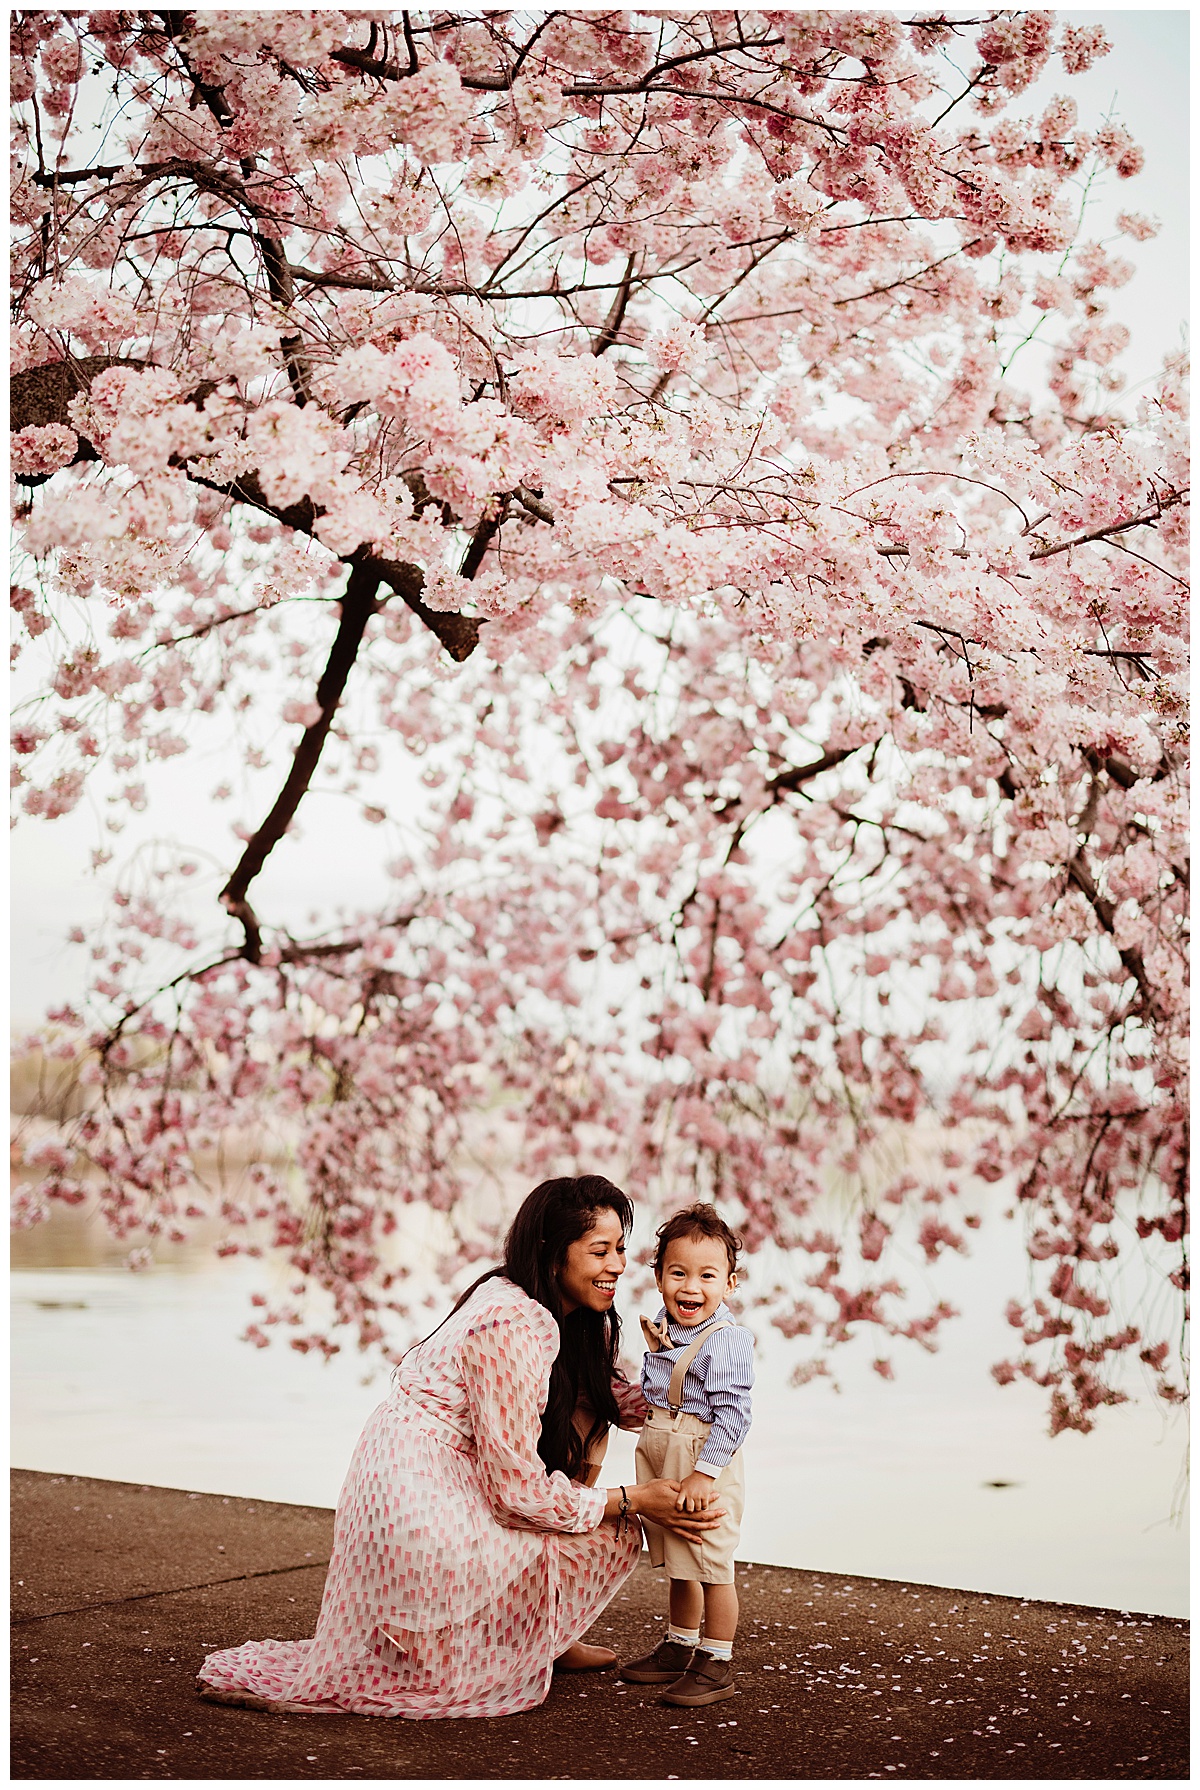 Mom and son smile together during their DC Cherry Blossom Photographer